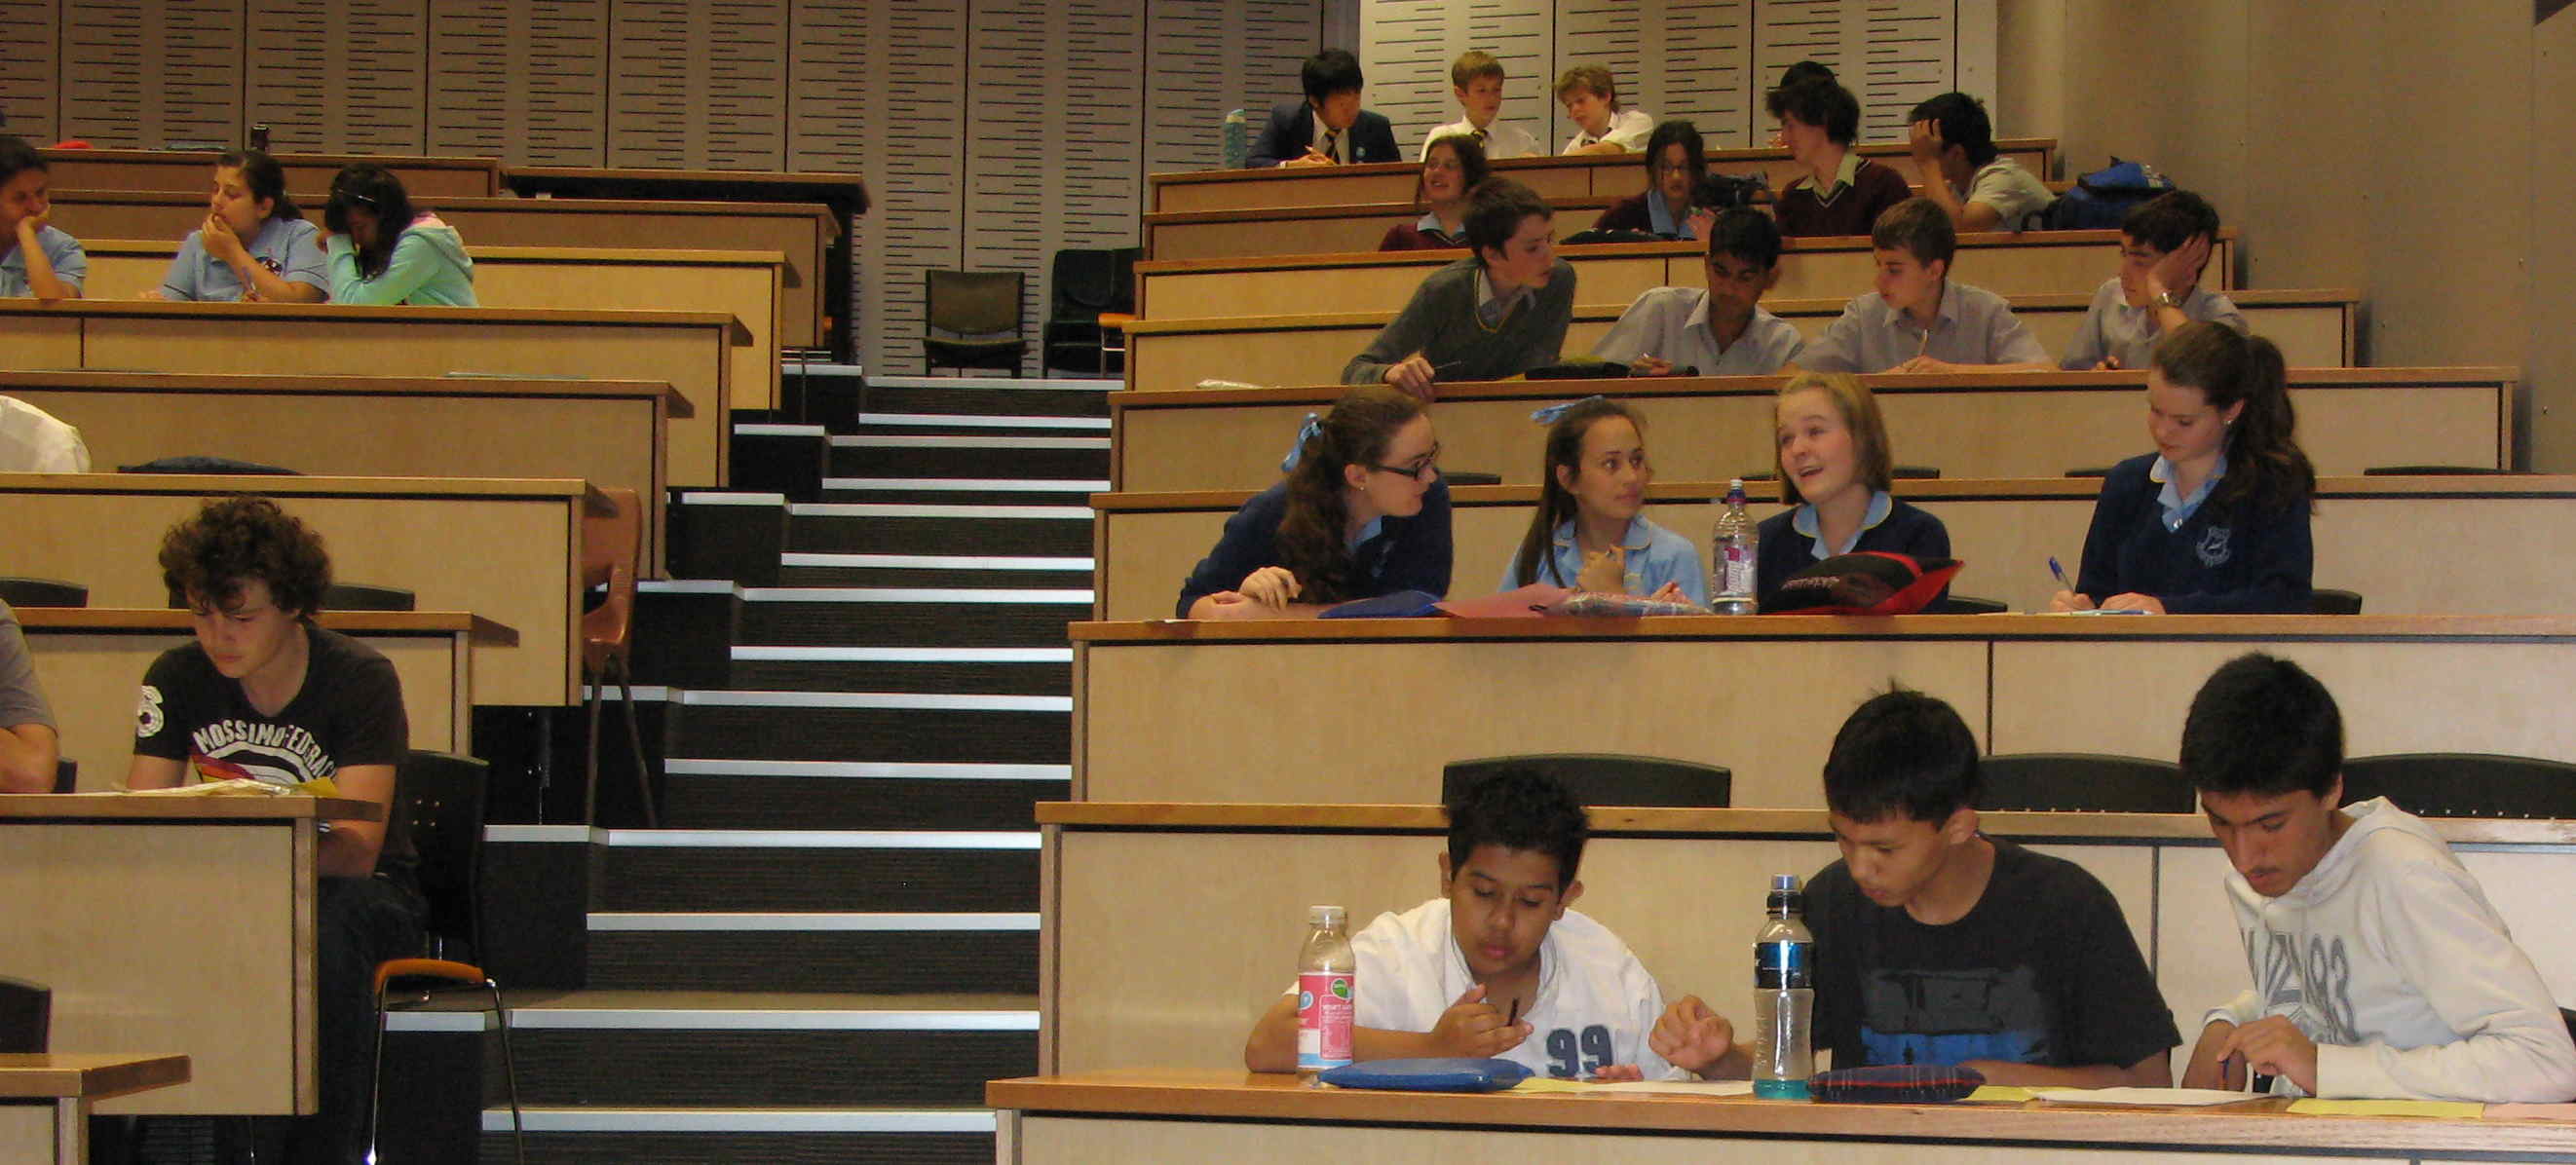 WAJO 2010: Team Competition in Weatherburn Lecture Theatre